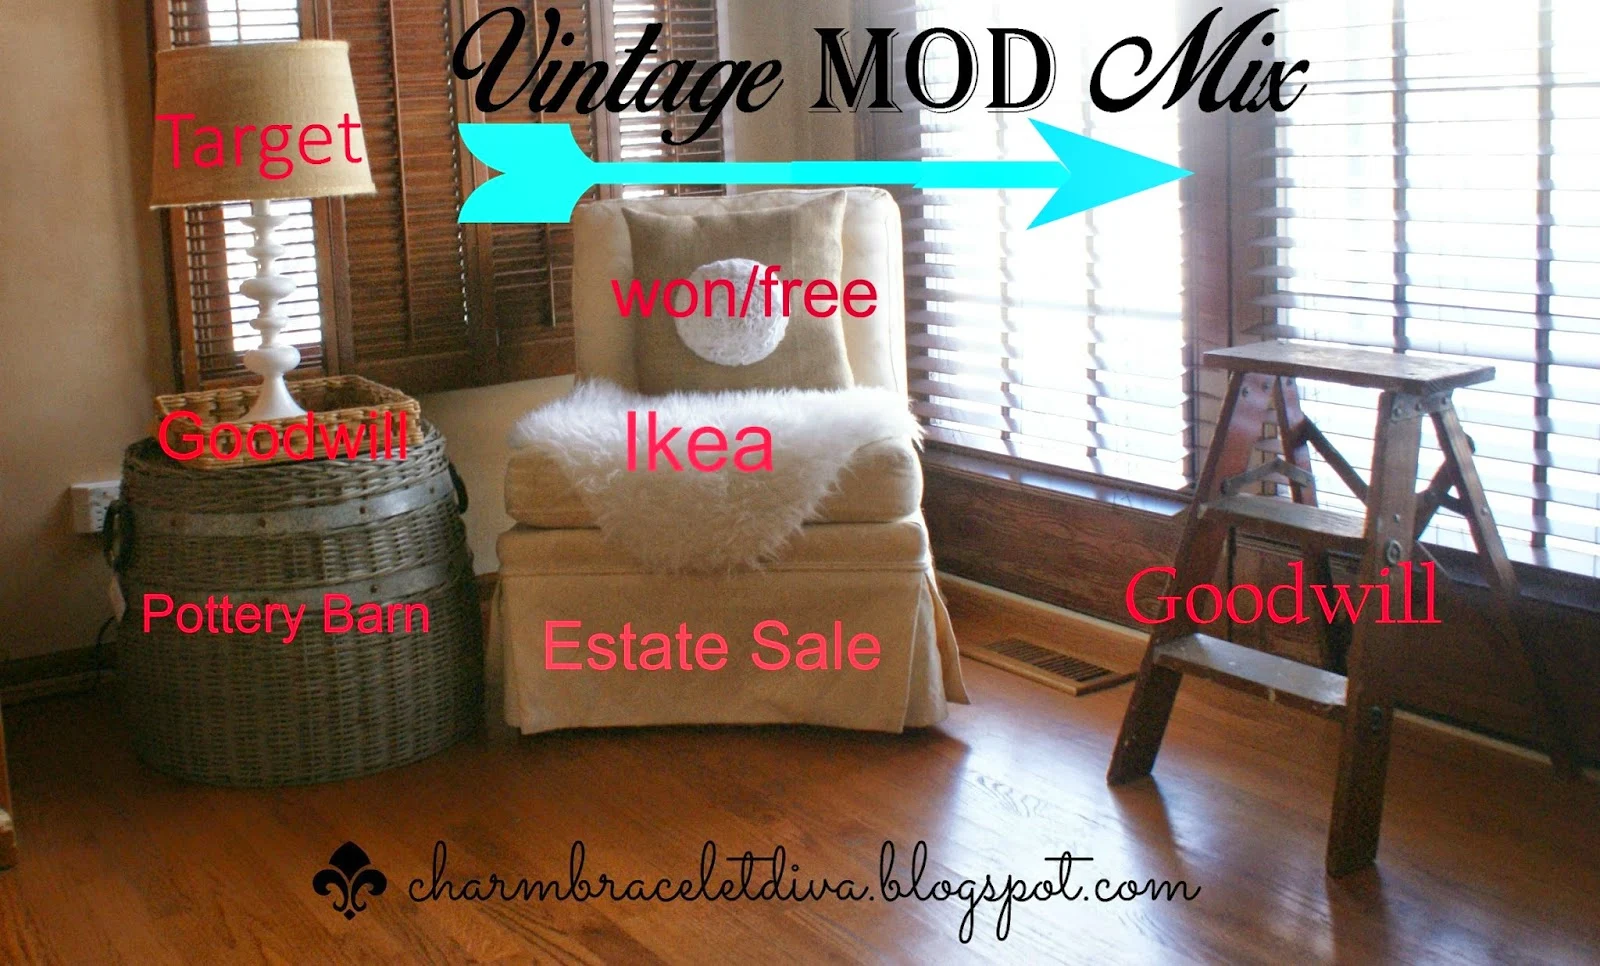 Vintage mod mix of furniture and accessories